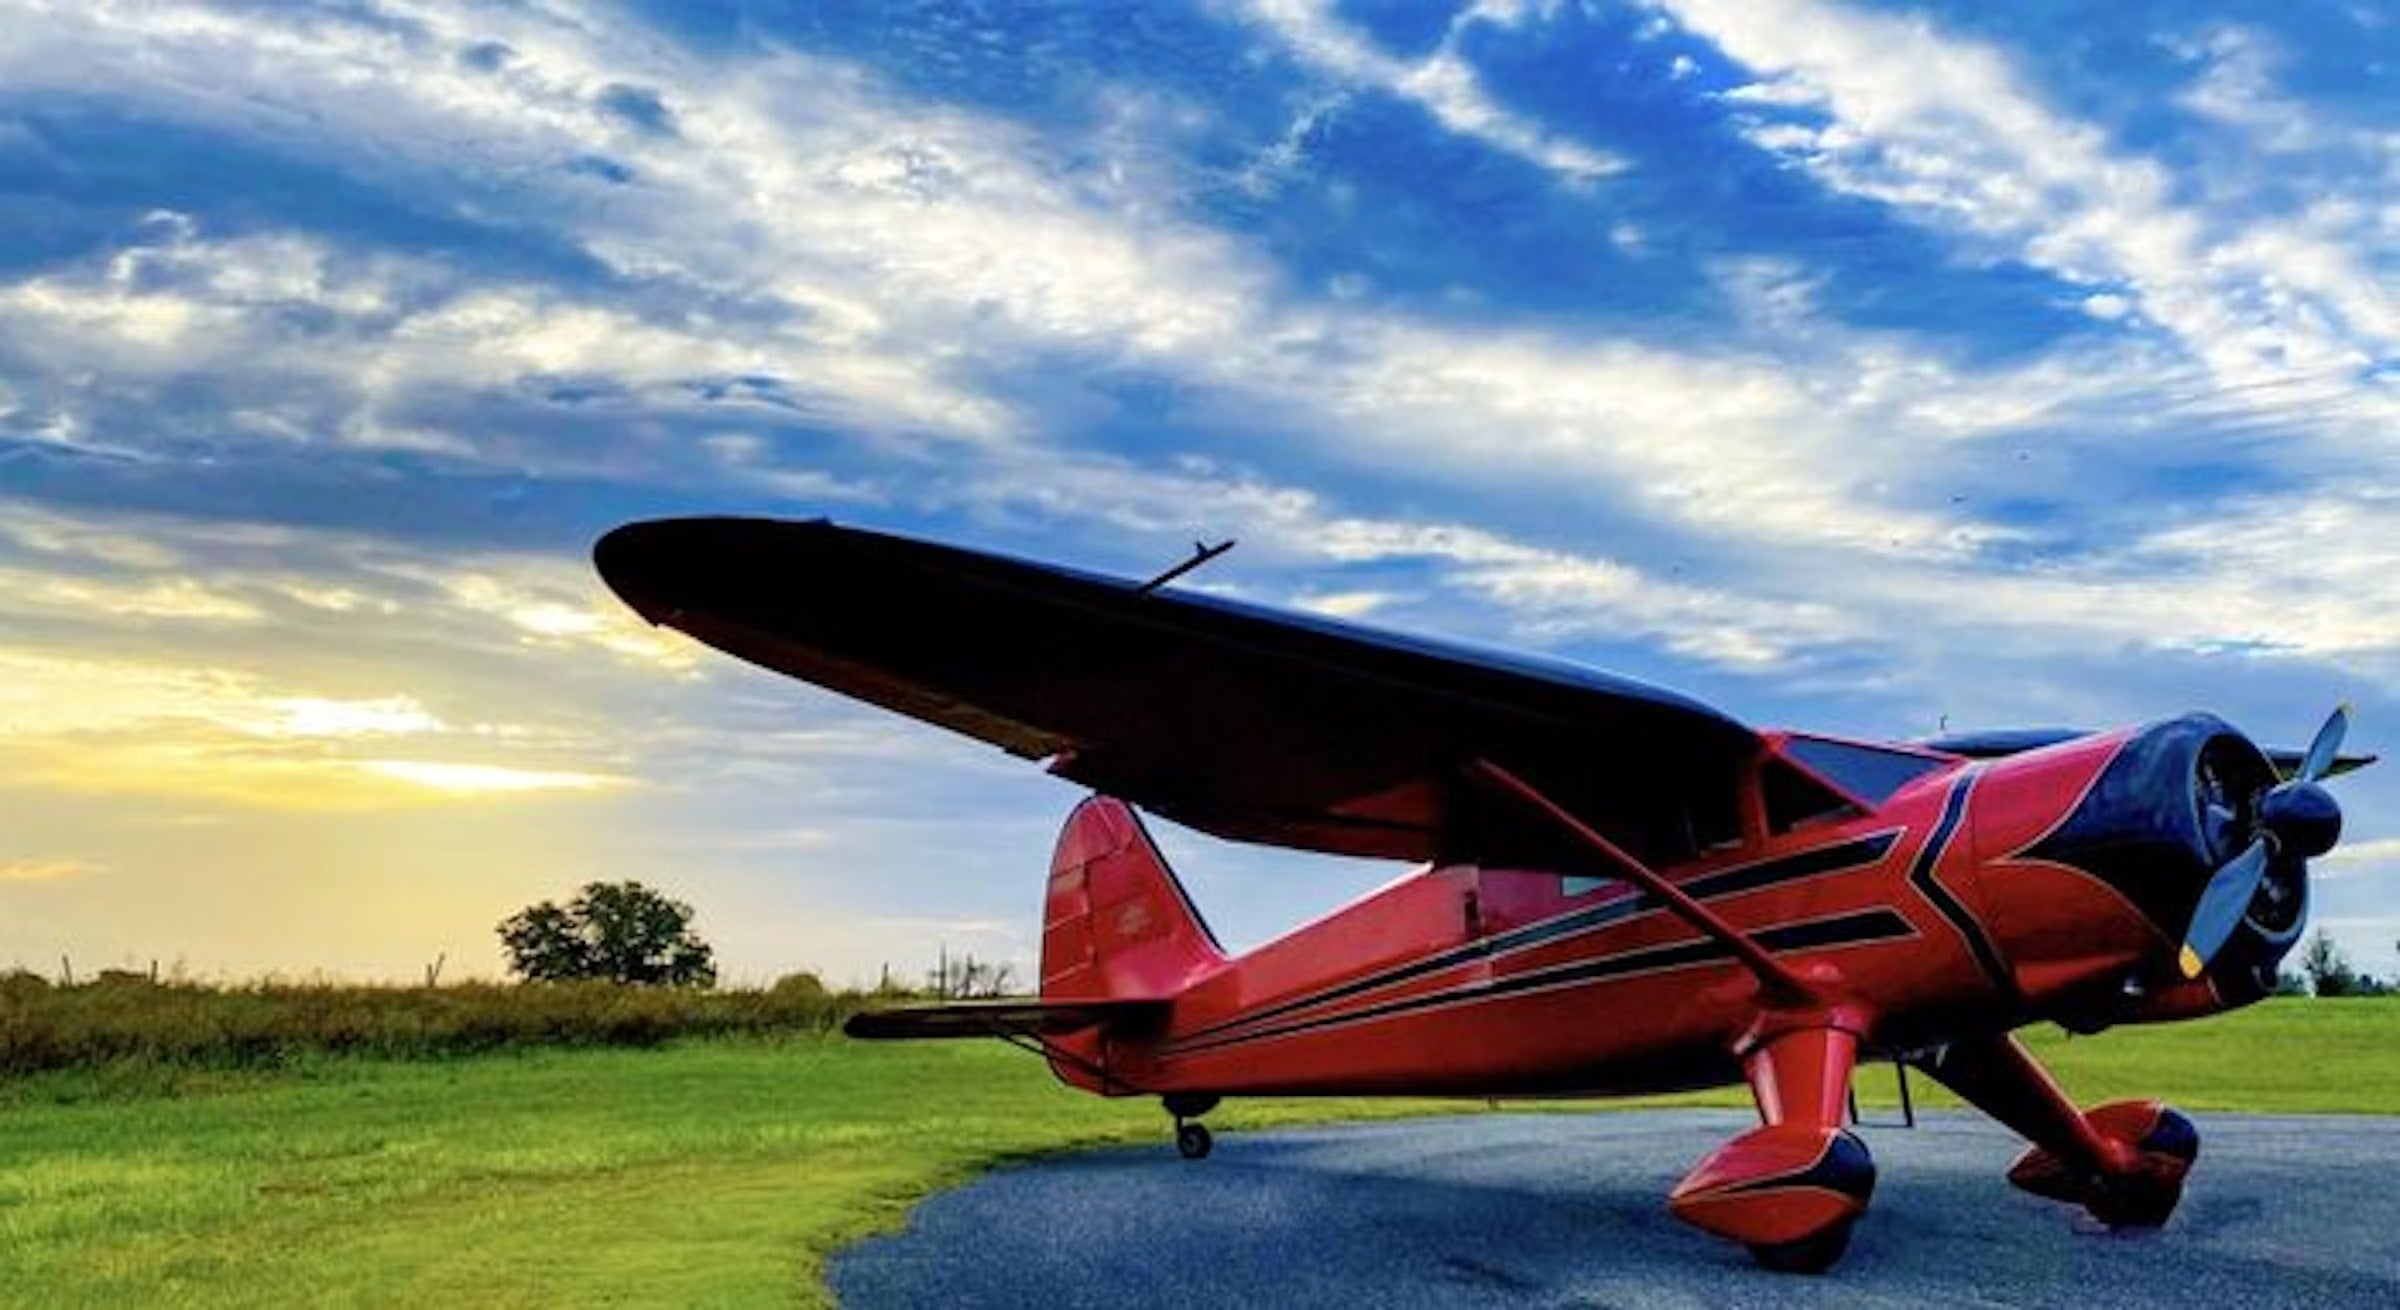 This 1944 Stinson Vultee V-77 Is a Warbird-Eligible ‘AircraftForSale’ Top Pick